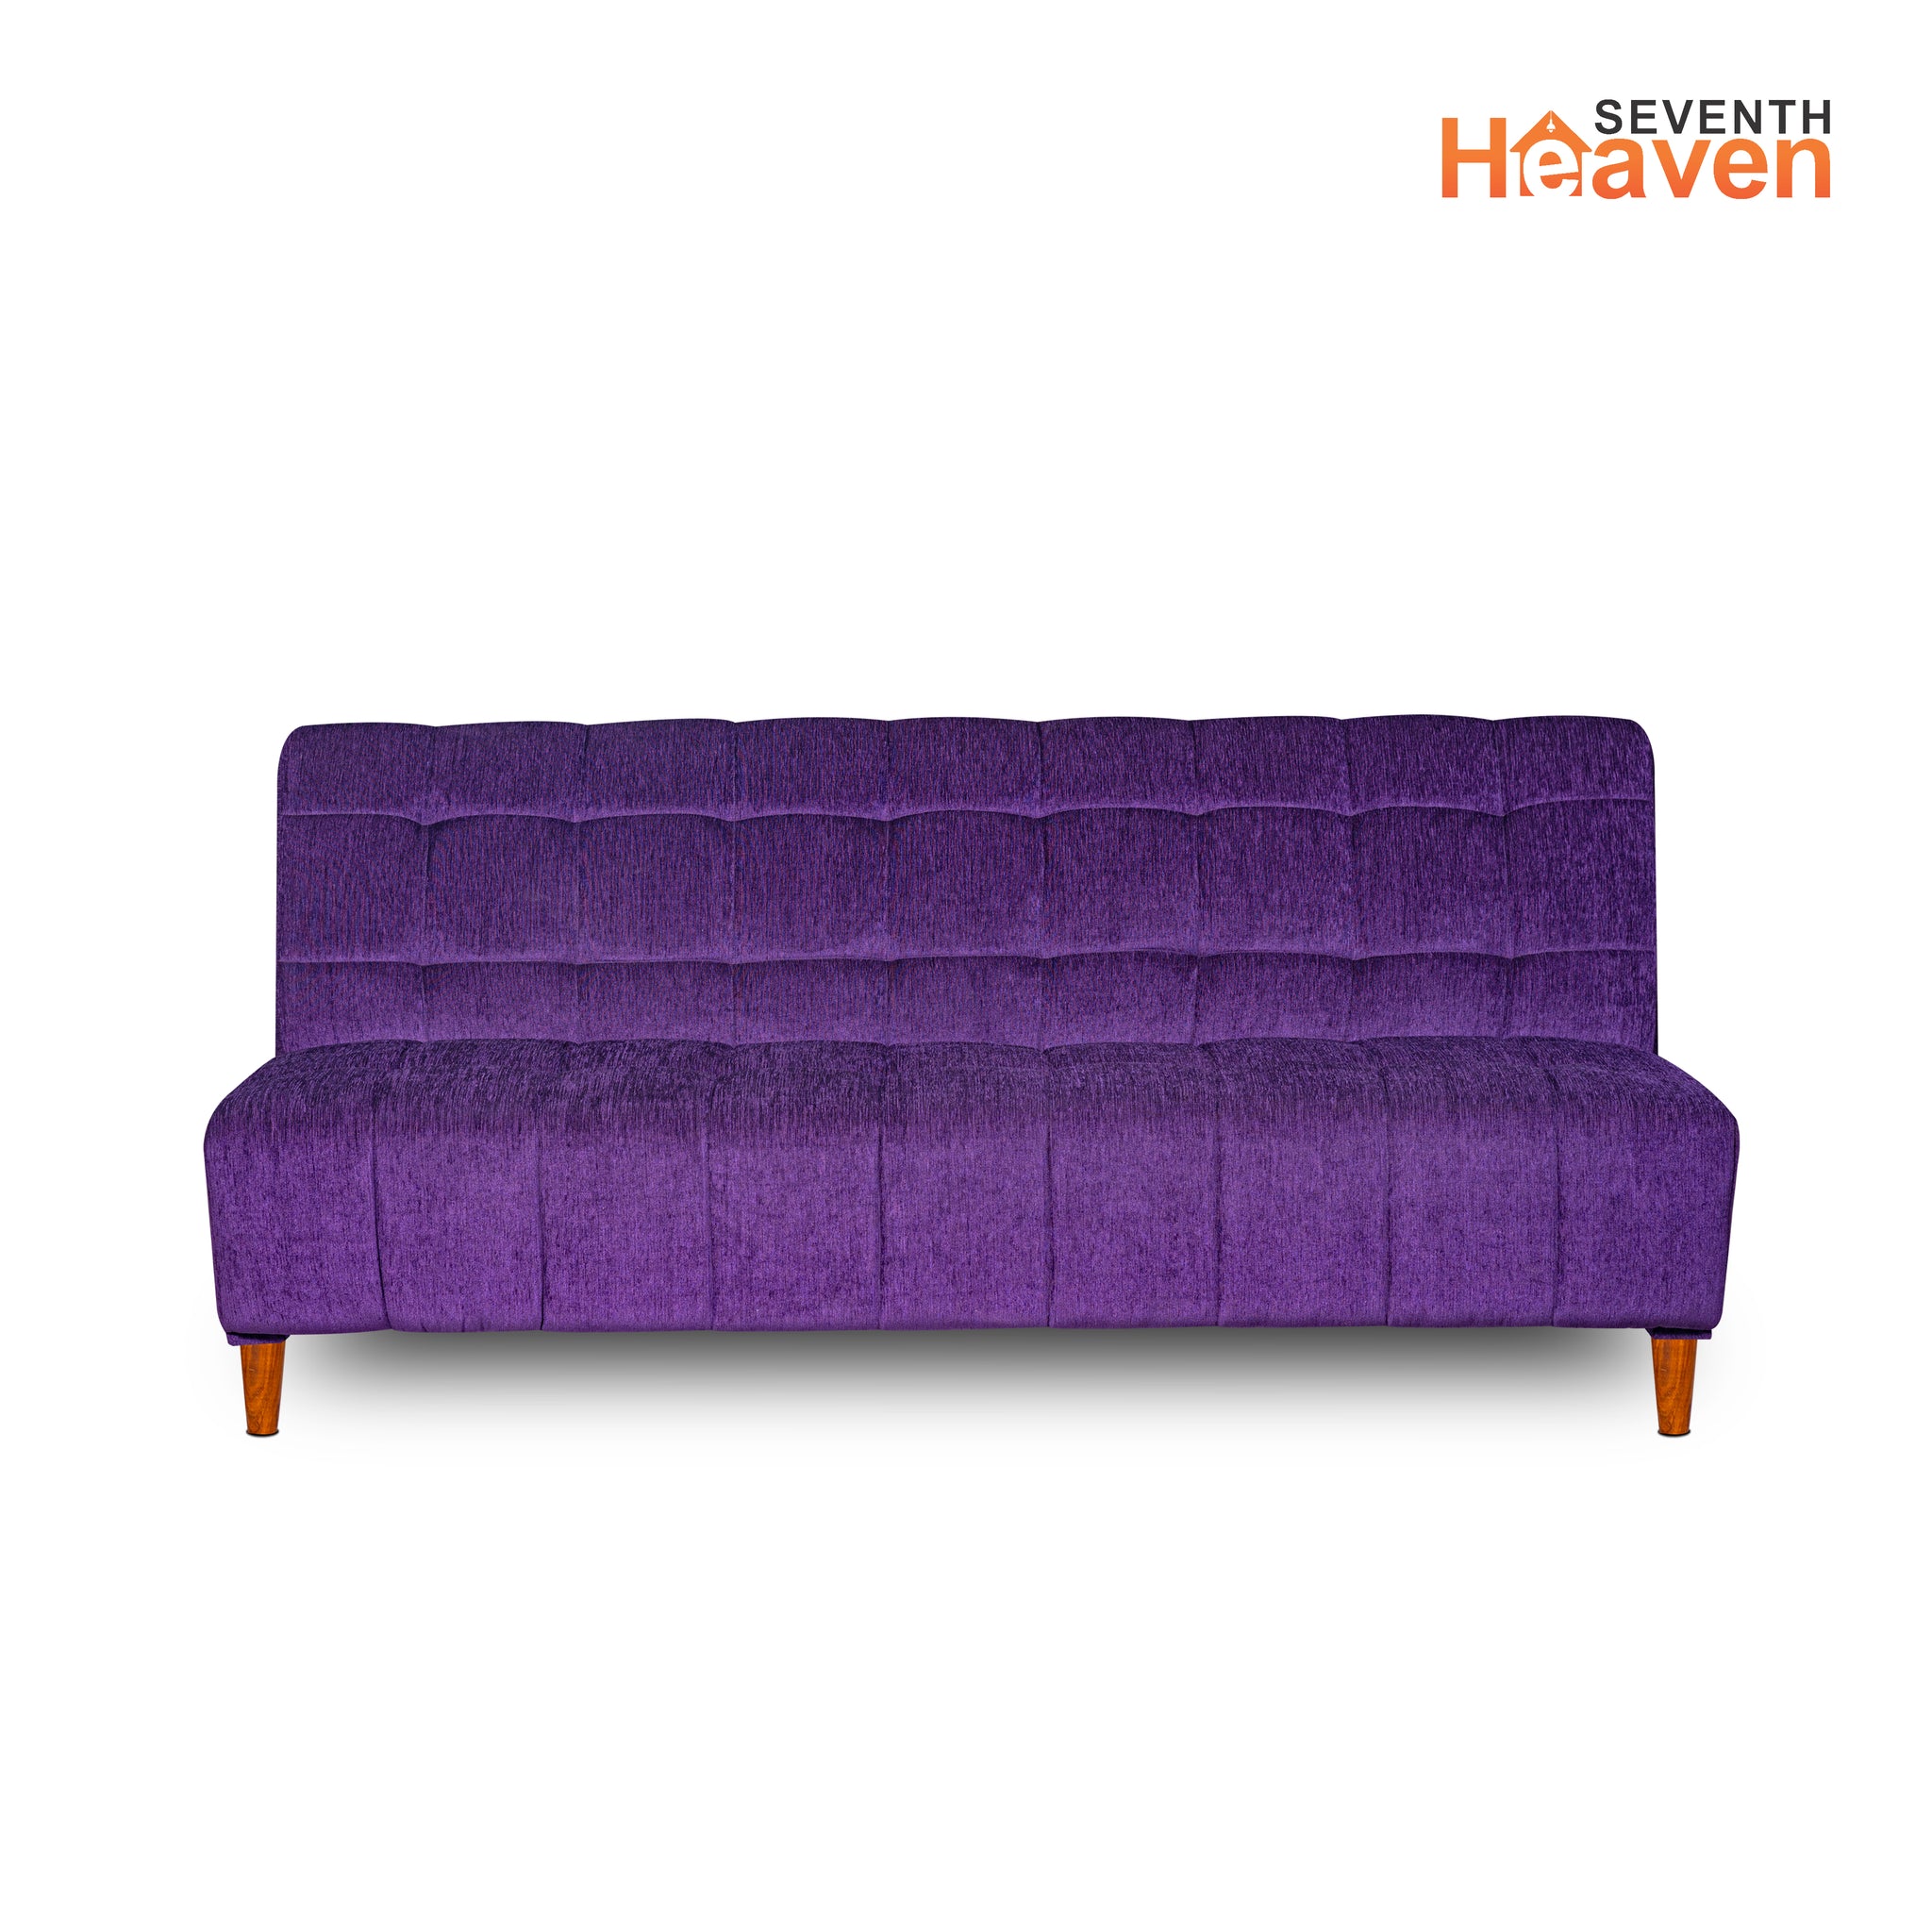 Seventh Heaven Florida 4 Seater Wooden Sofa Cum Bed. Modern & Elegant Smart Furniture Range for luxurious homes, living rooms and offices. Use as a sofa, lounger or bed. Perfect for guests. Molphino fabric with sheesham polished wooden legs. Purple colour.